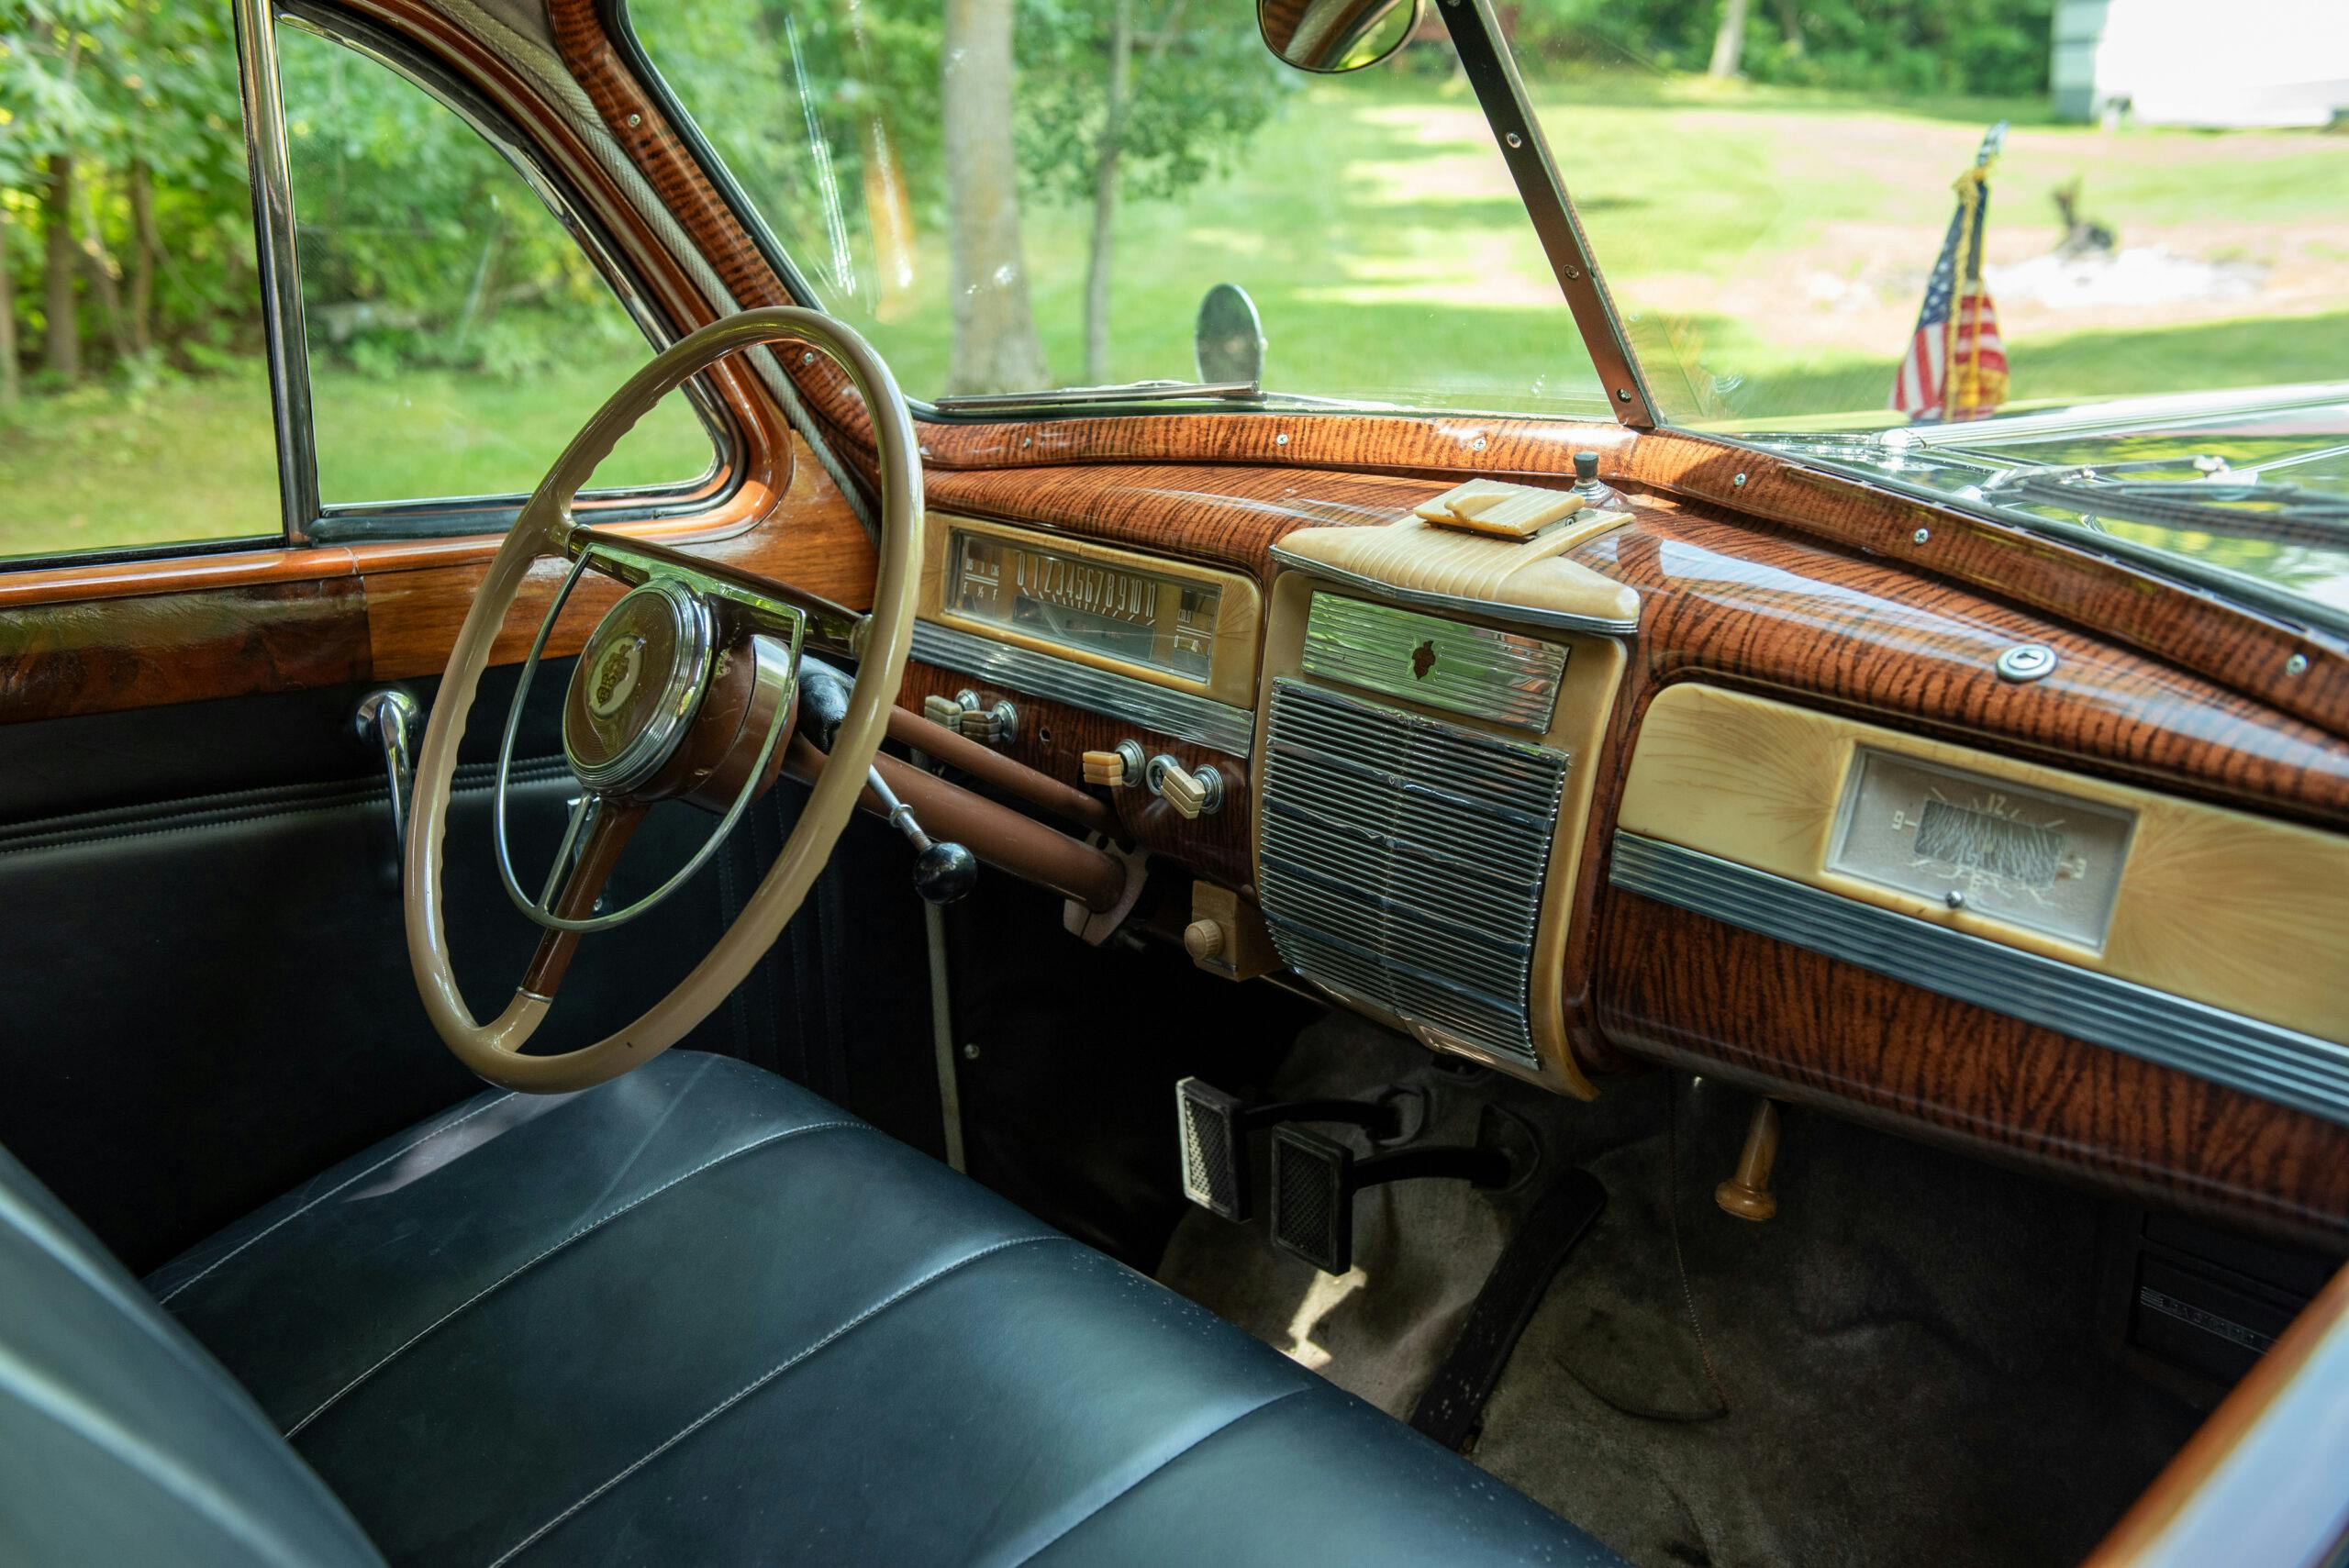 1941 Packard Super Eight One-Eighty Limo interior front dash